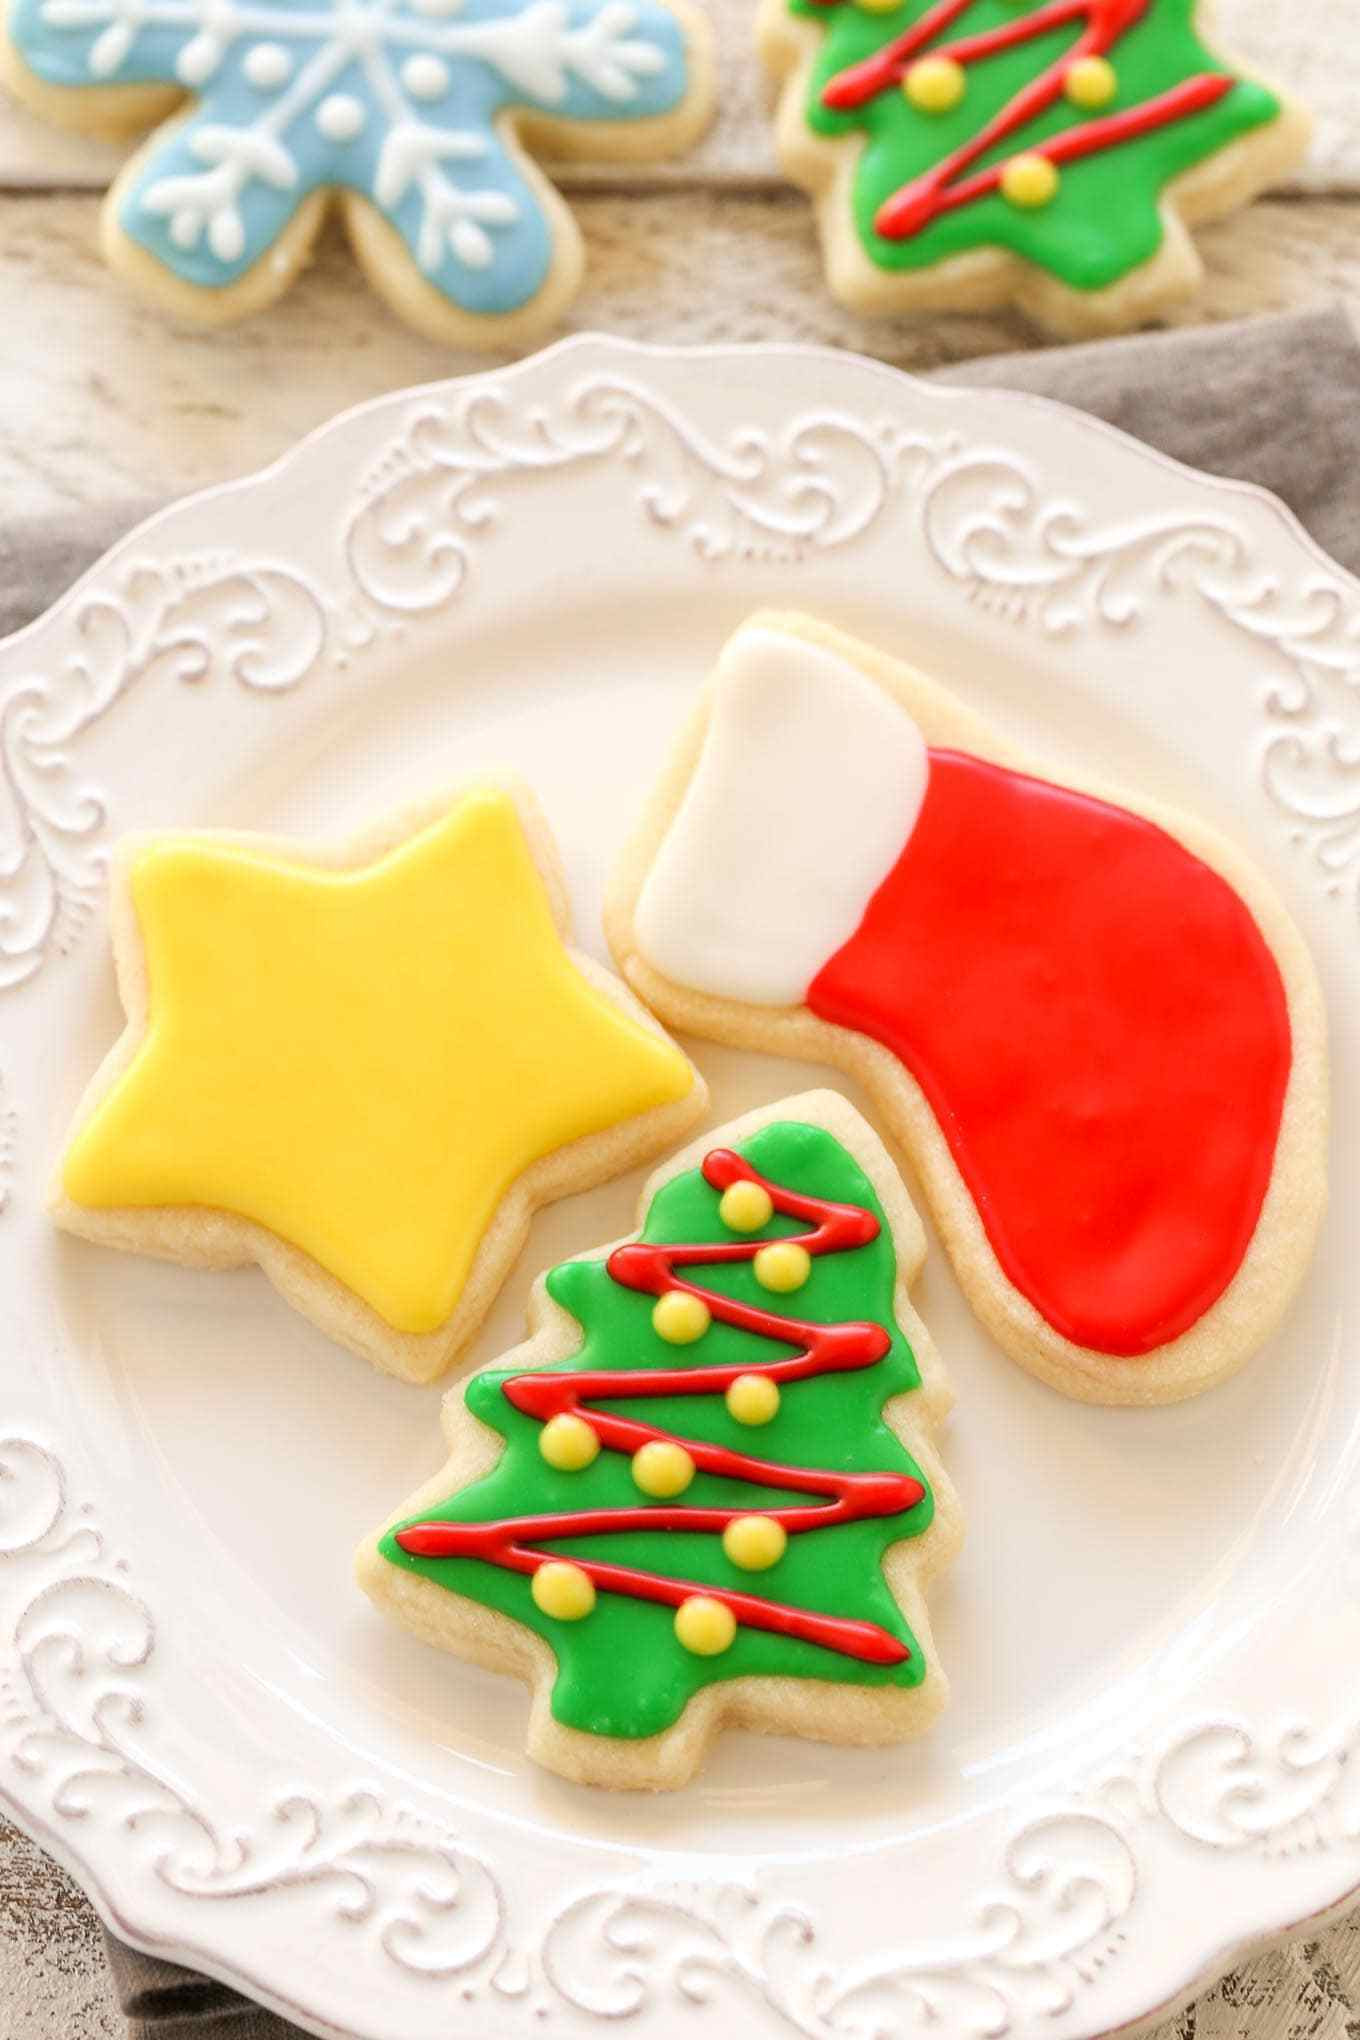 Christmas Cut Out Sugar Cookies Recipes
 Soft Christmas Cut Out Sugar Cookies Live Well Bake ten